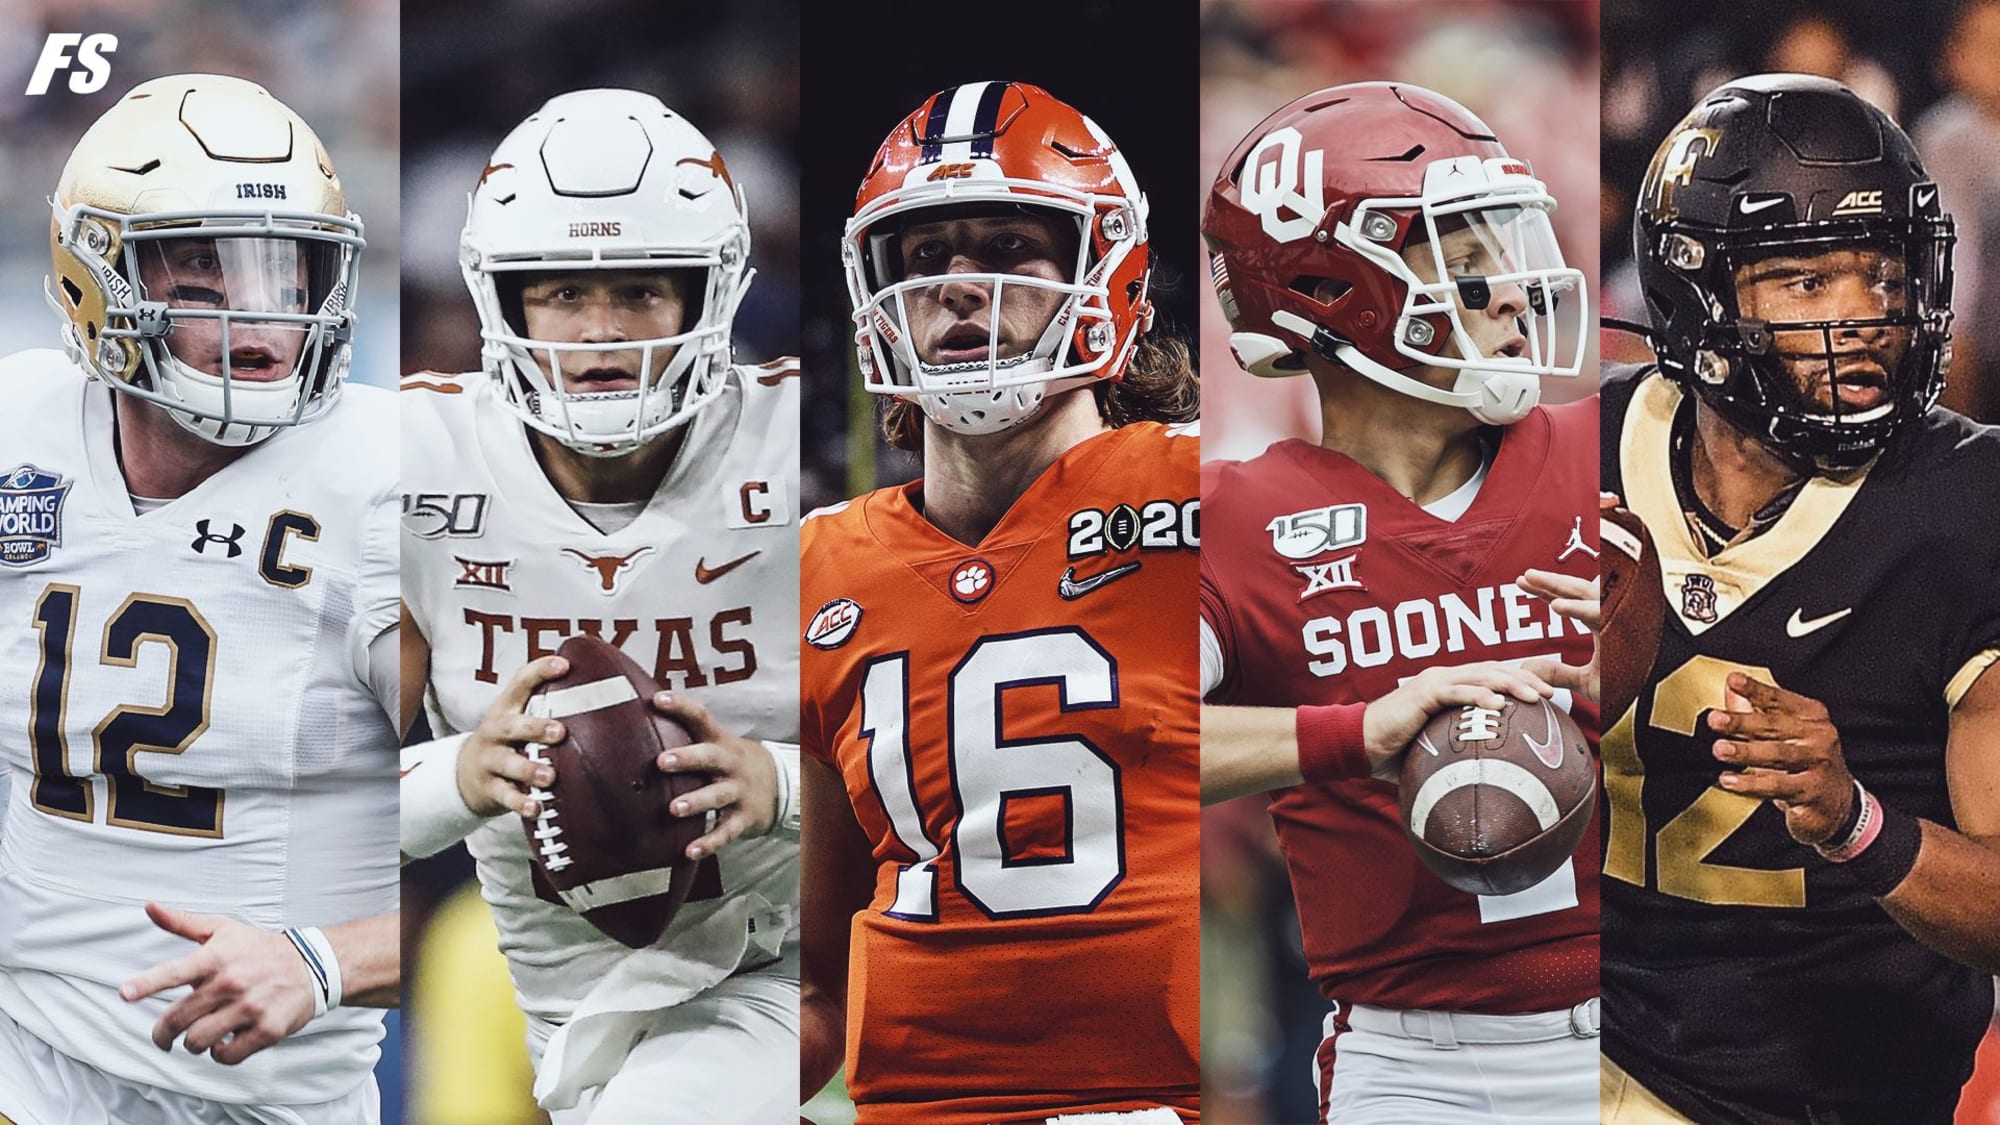 Ranking the top 10 college football quarterbacks playing the 2020